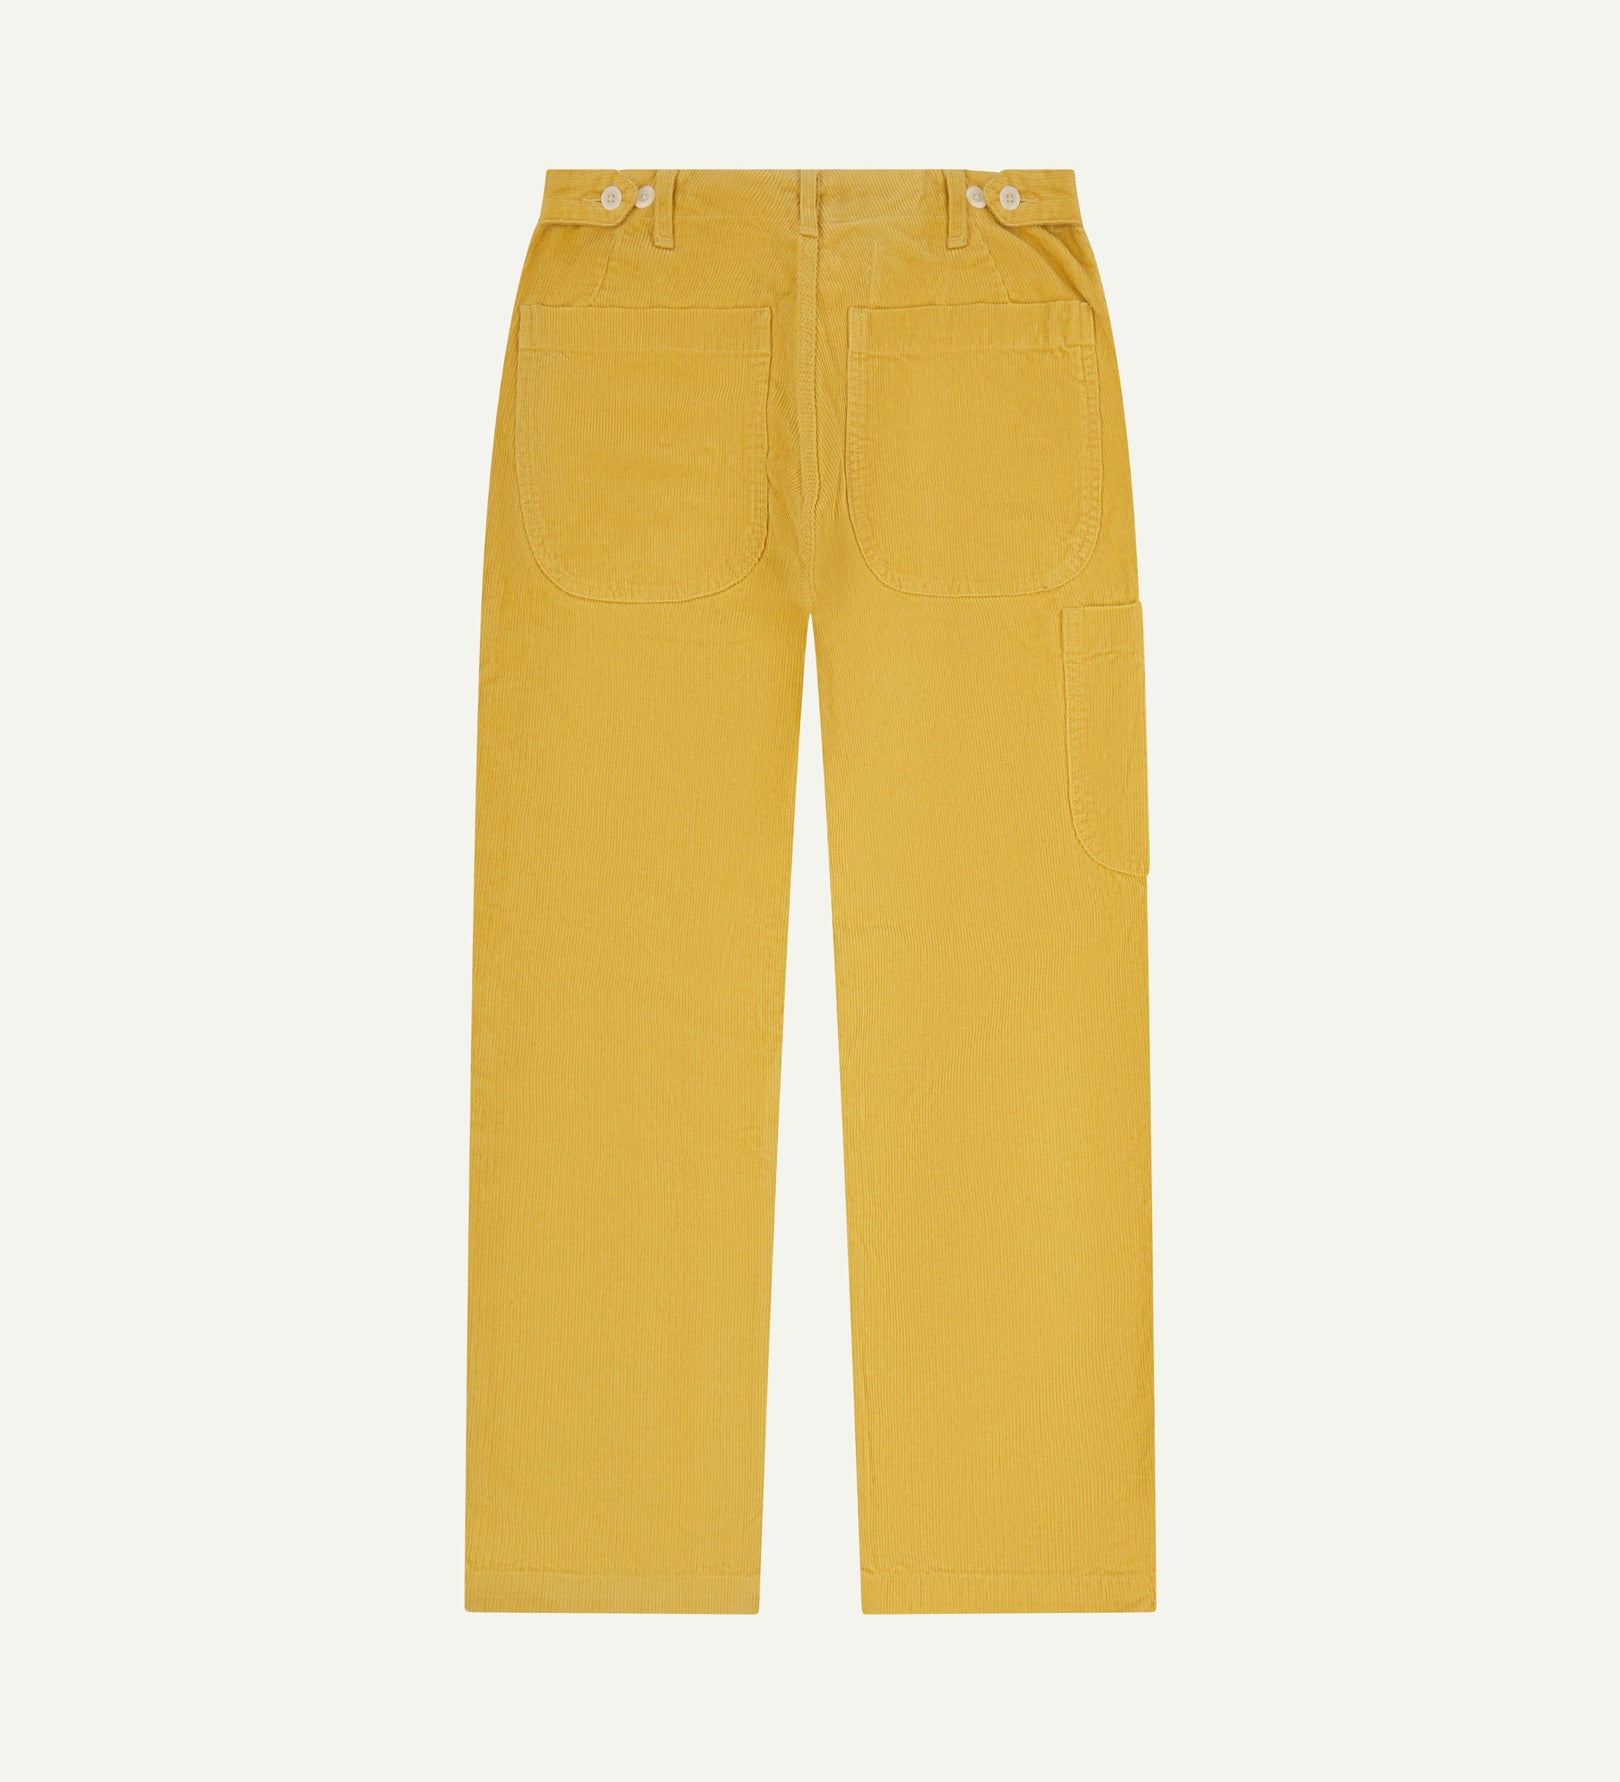 Full length back view of Uskees 5012 men's corduroy acid yellow (citronella) pants with a view of belt loops, waist adjusters and tool pocket on thigh.